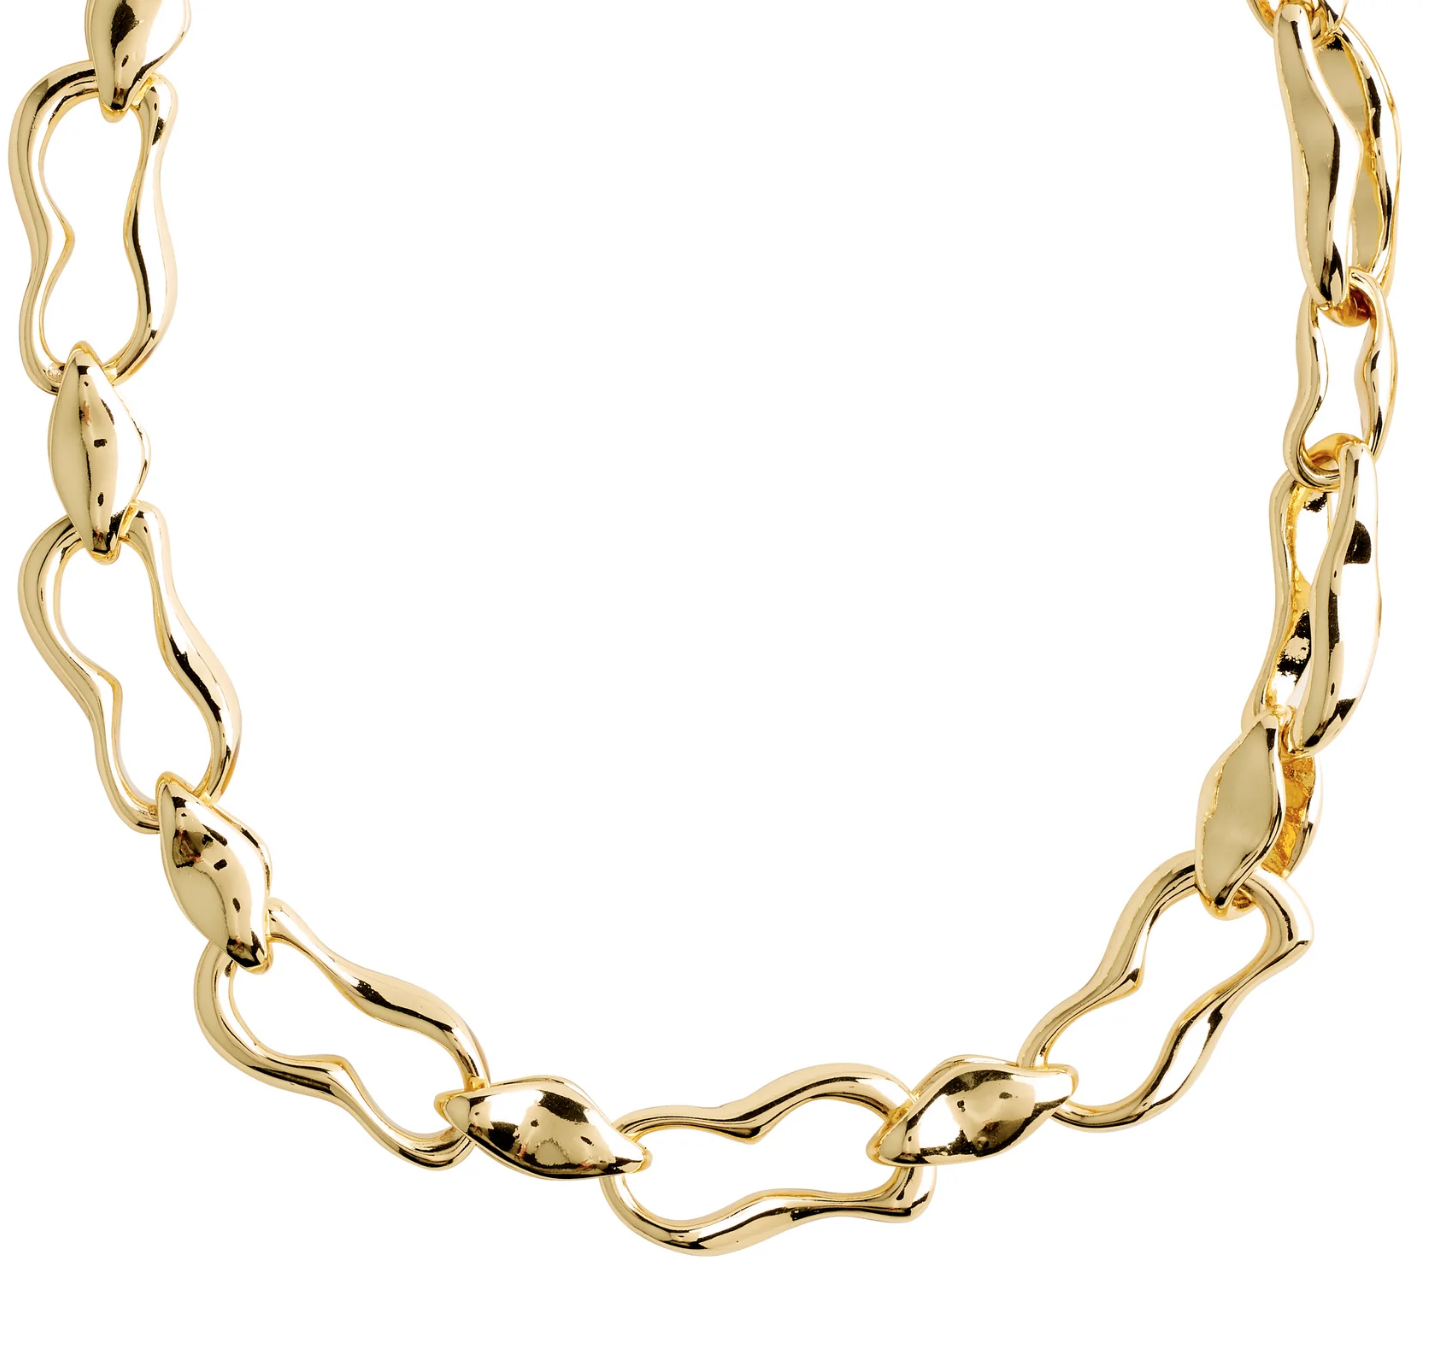 Pilgrim Wave Recycled Necklace in Gold Plated